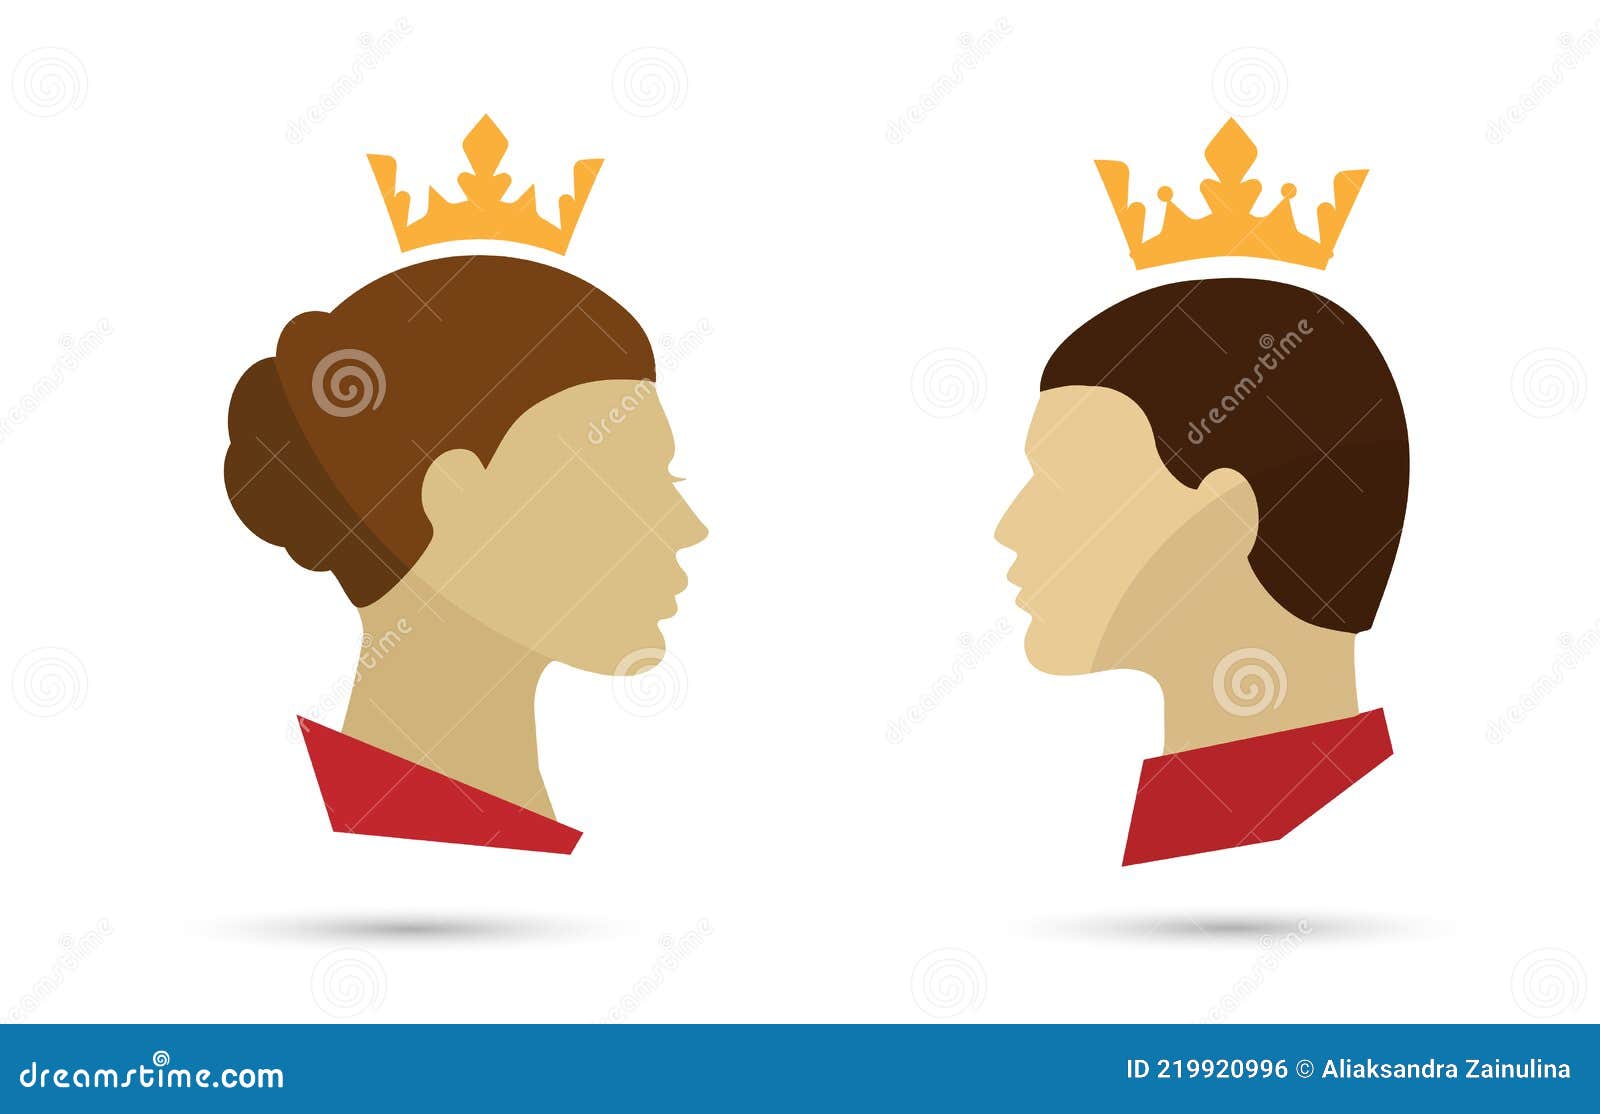 King and Queen Heads Colorful Vector Silhouette Stock Vector ...